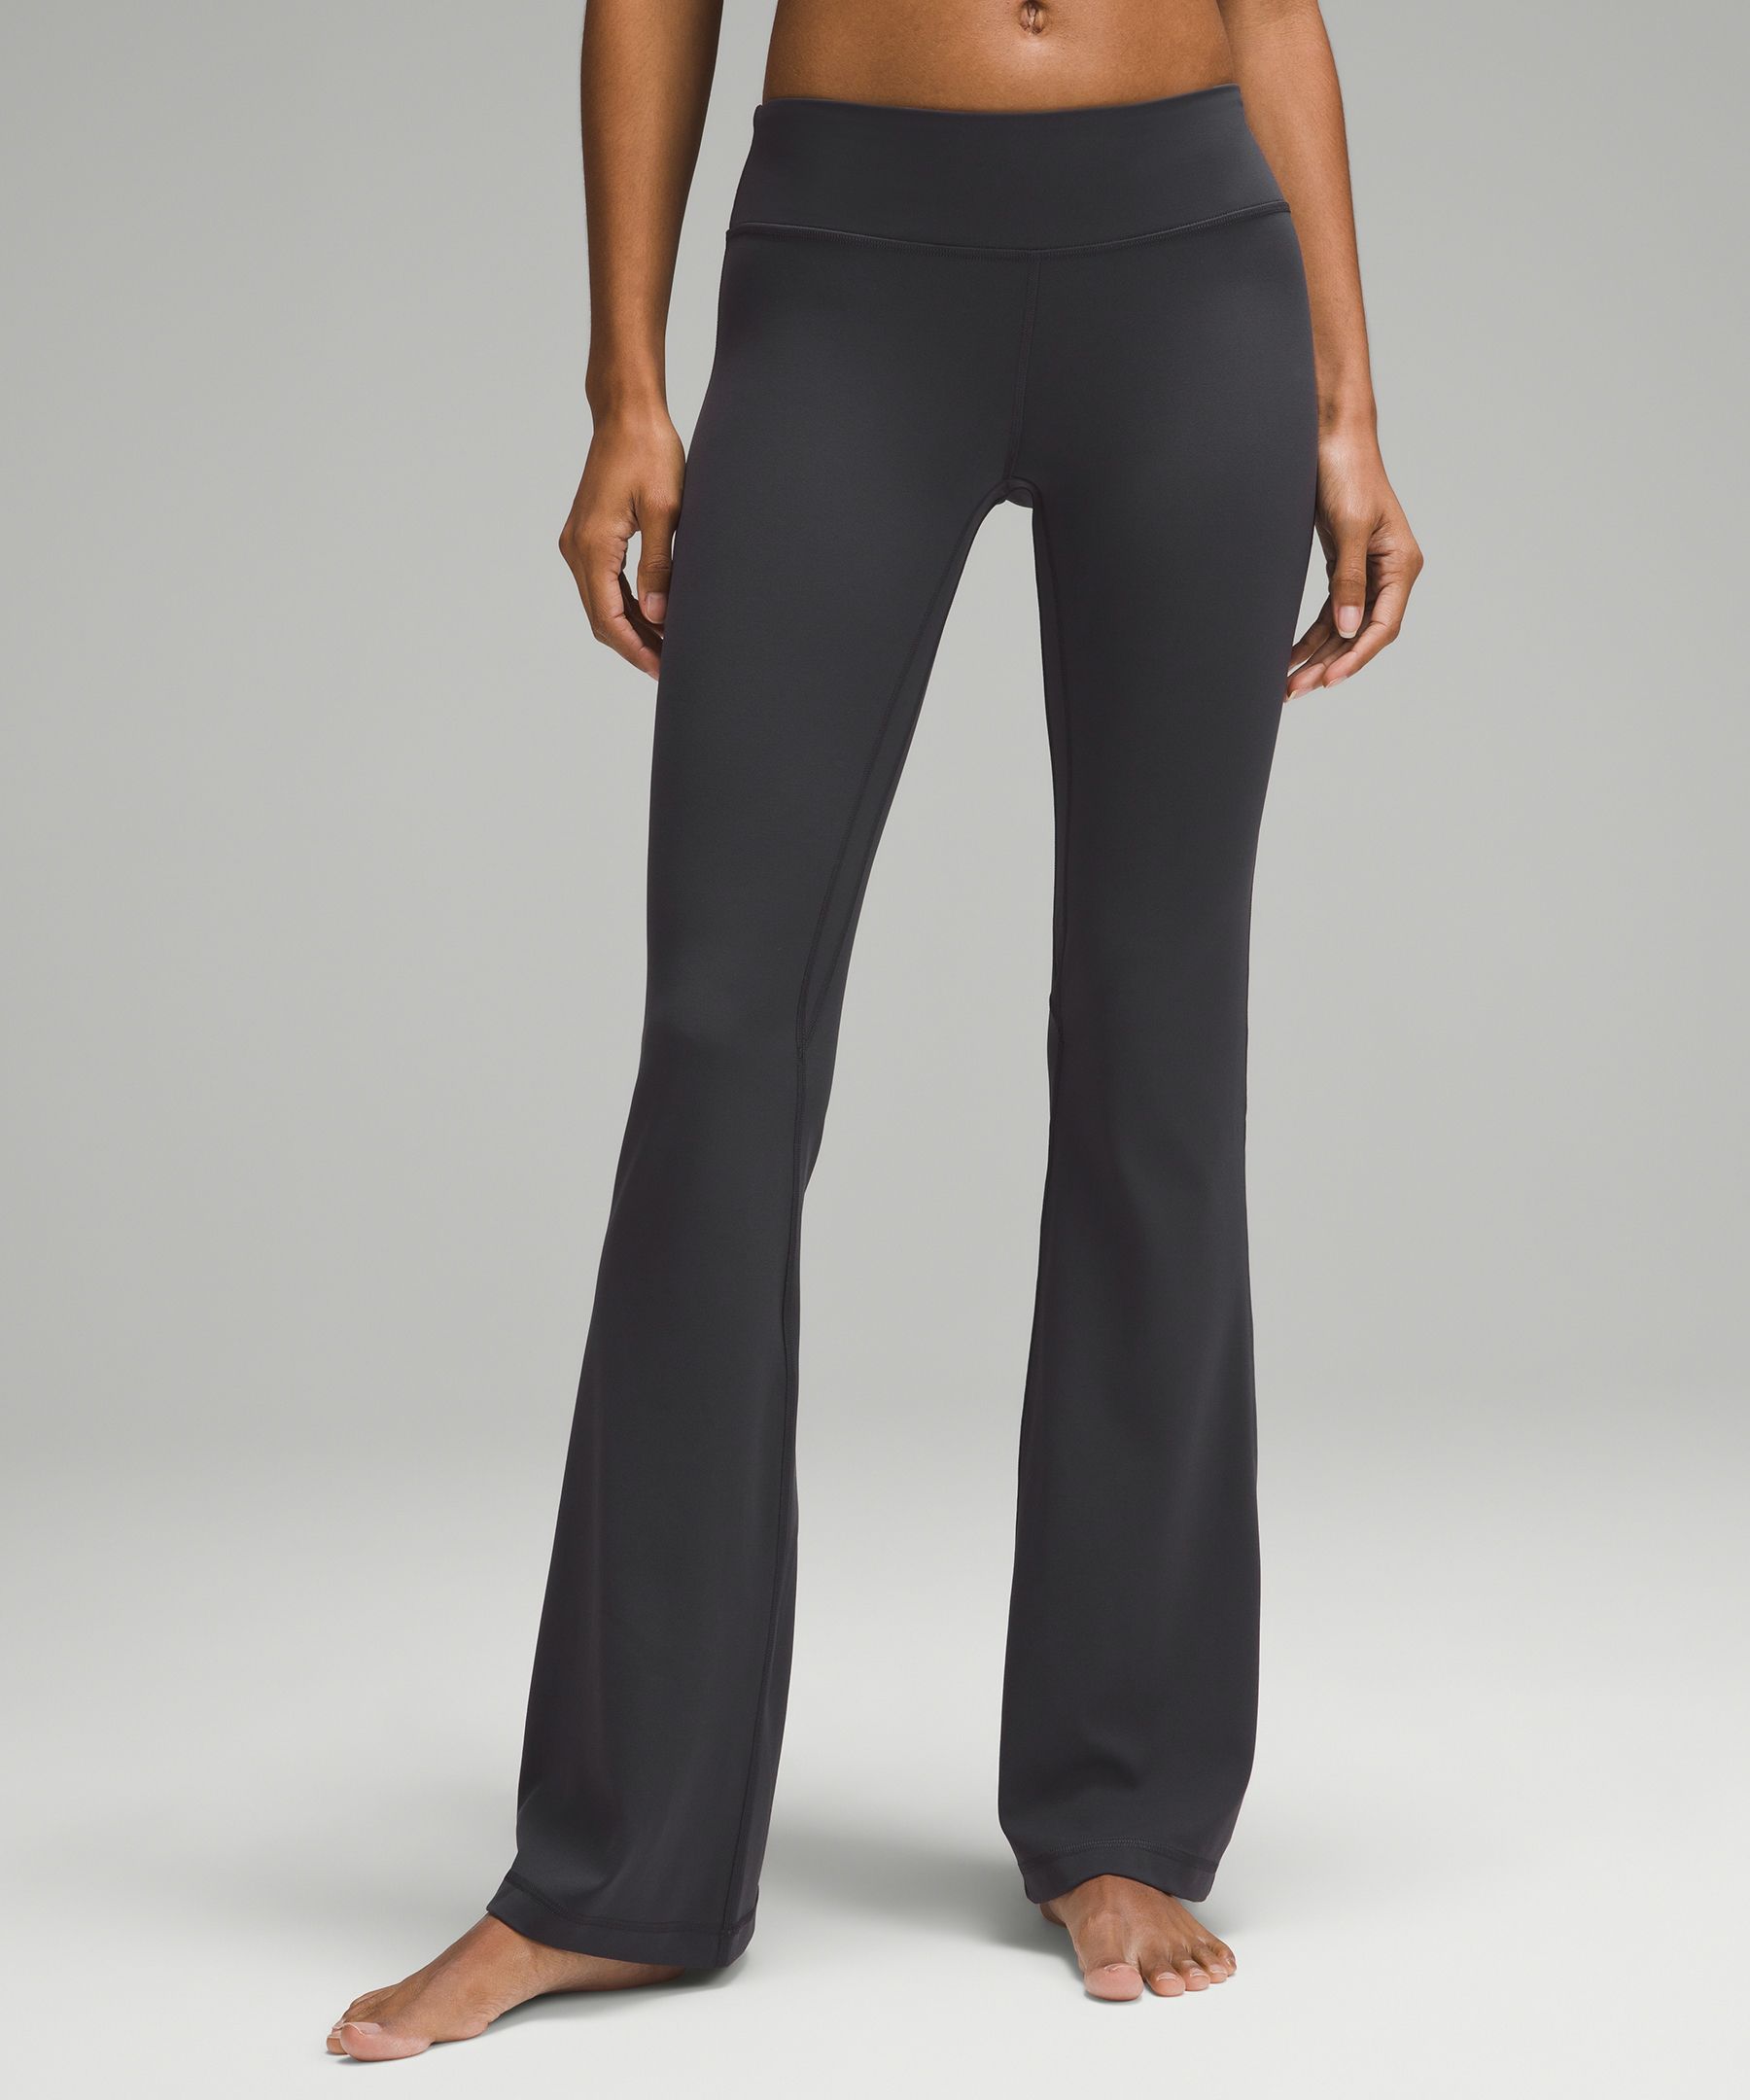 lululemon Align Pants Review - Mountain Weekly News